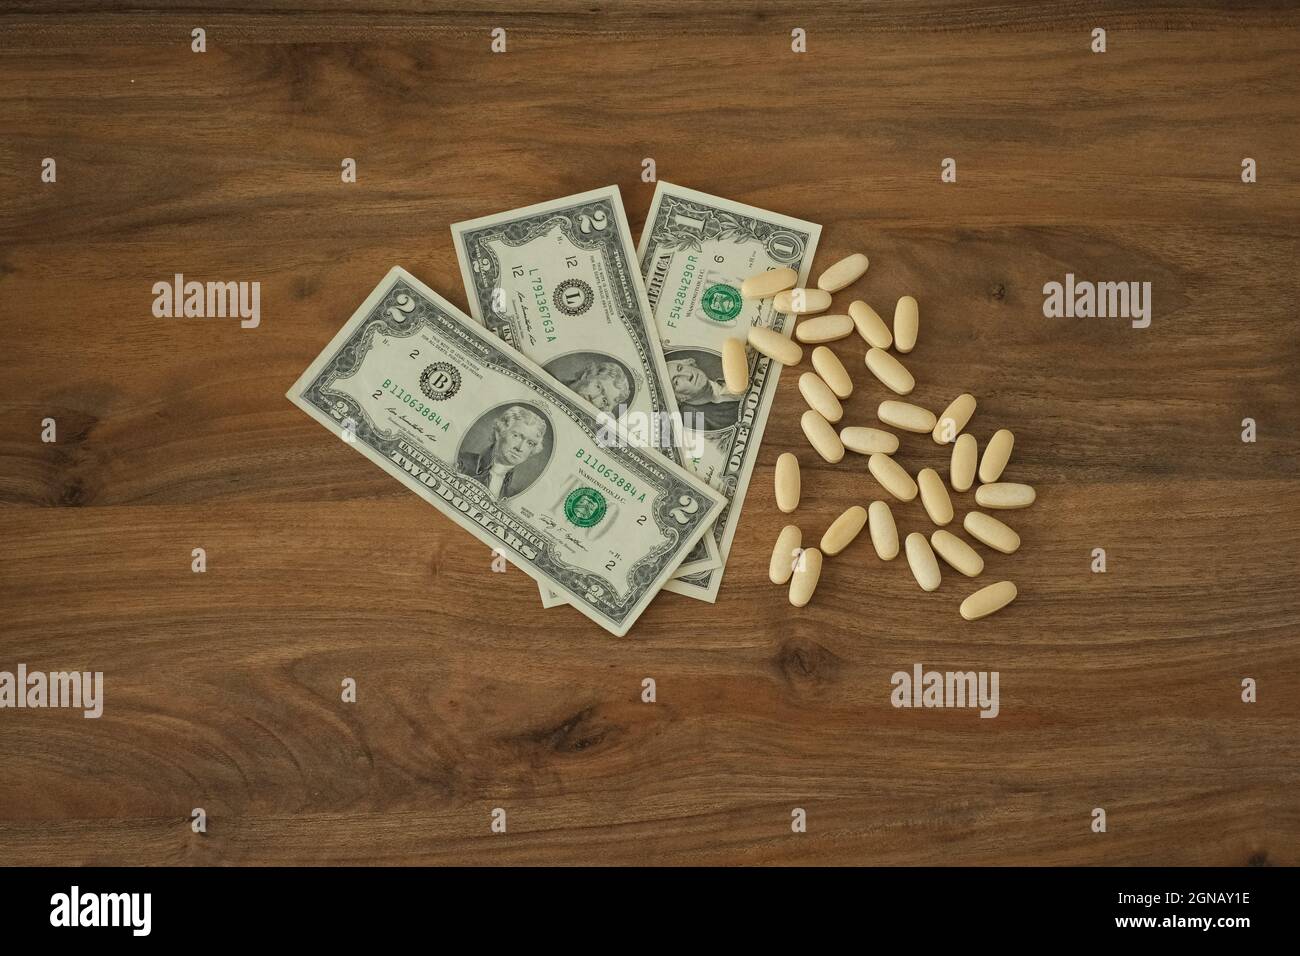 Money and pills on the wooden table top view. Paid medicine idea concept. Financial distress and thinking about suicide. Stock Photo